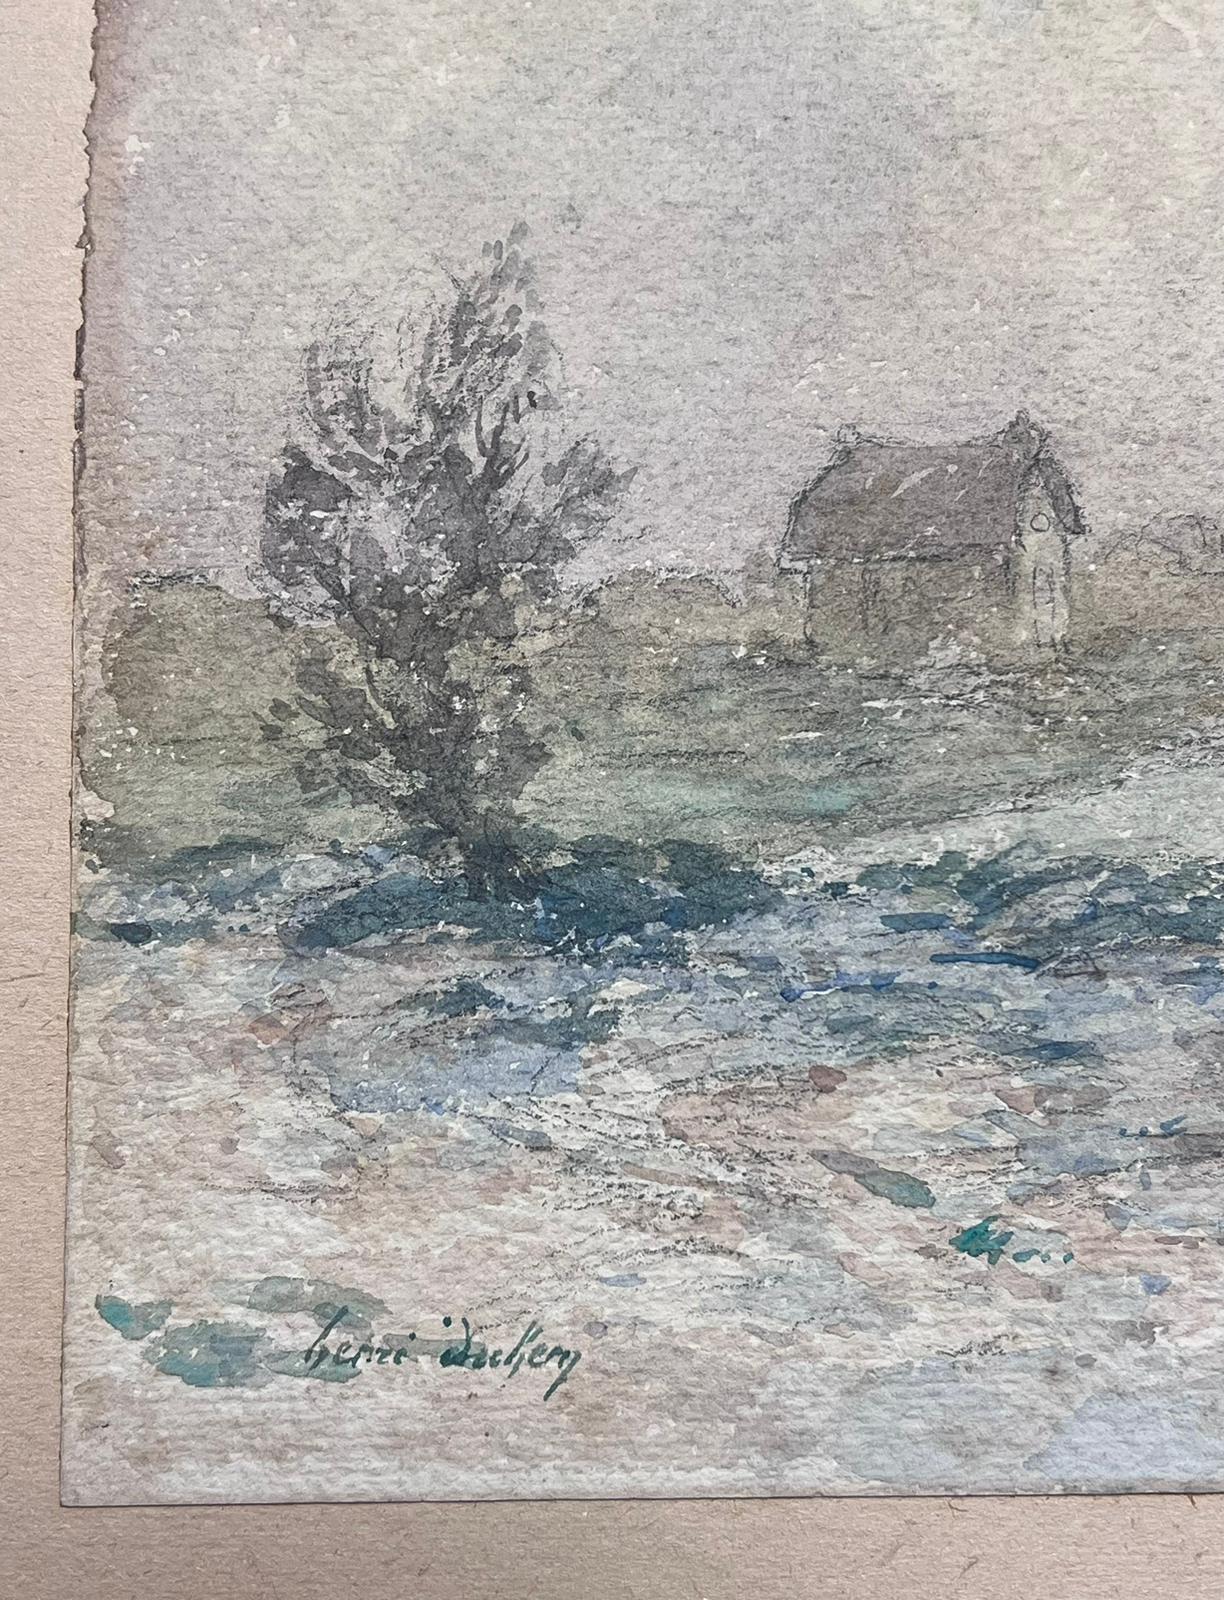 The artist: 
Henri Aime Duhem (1860-1941) French *see notes below, signed 

Title: Winter

Medium:  
signed gouache on paper, loosely laid over card, unframed

card: 10 x 13 inches
painting: 9.25 x 12 inches

Provenance: 
private collection of this